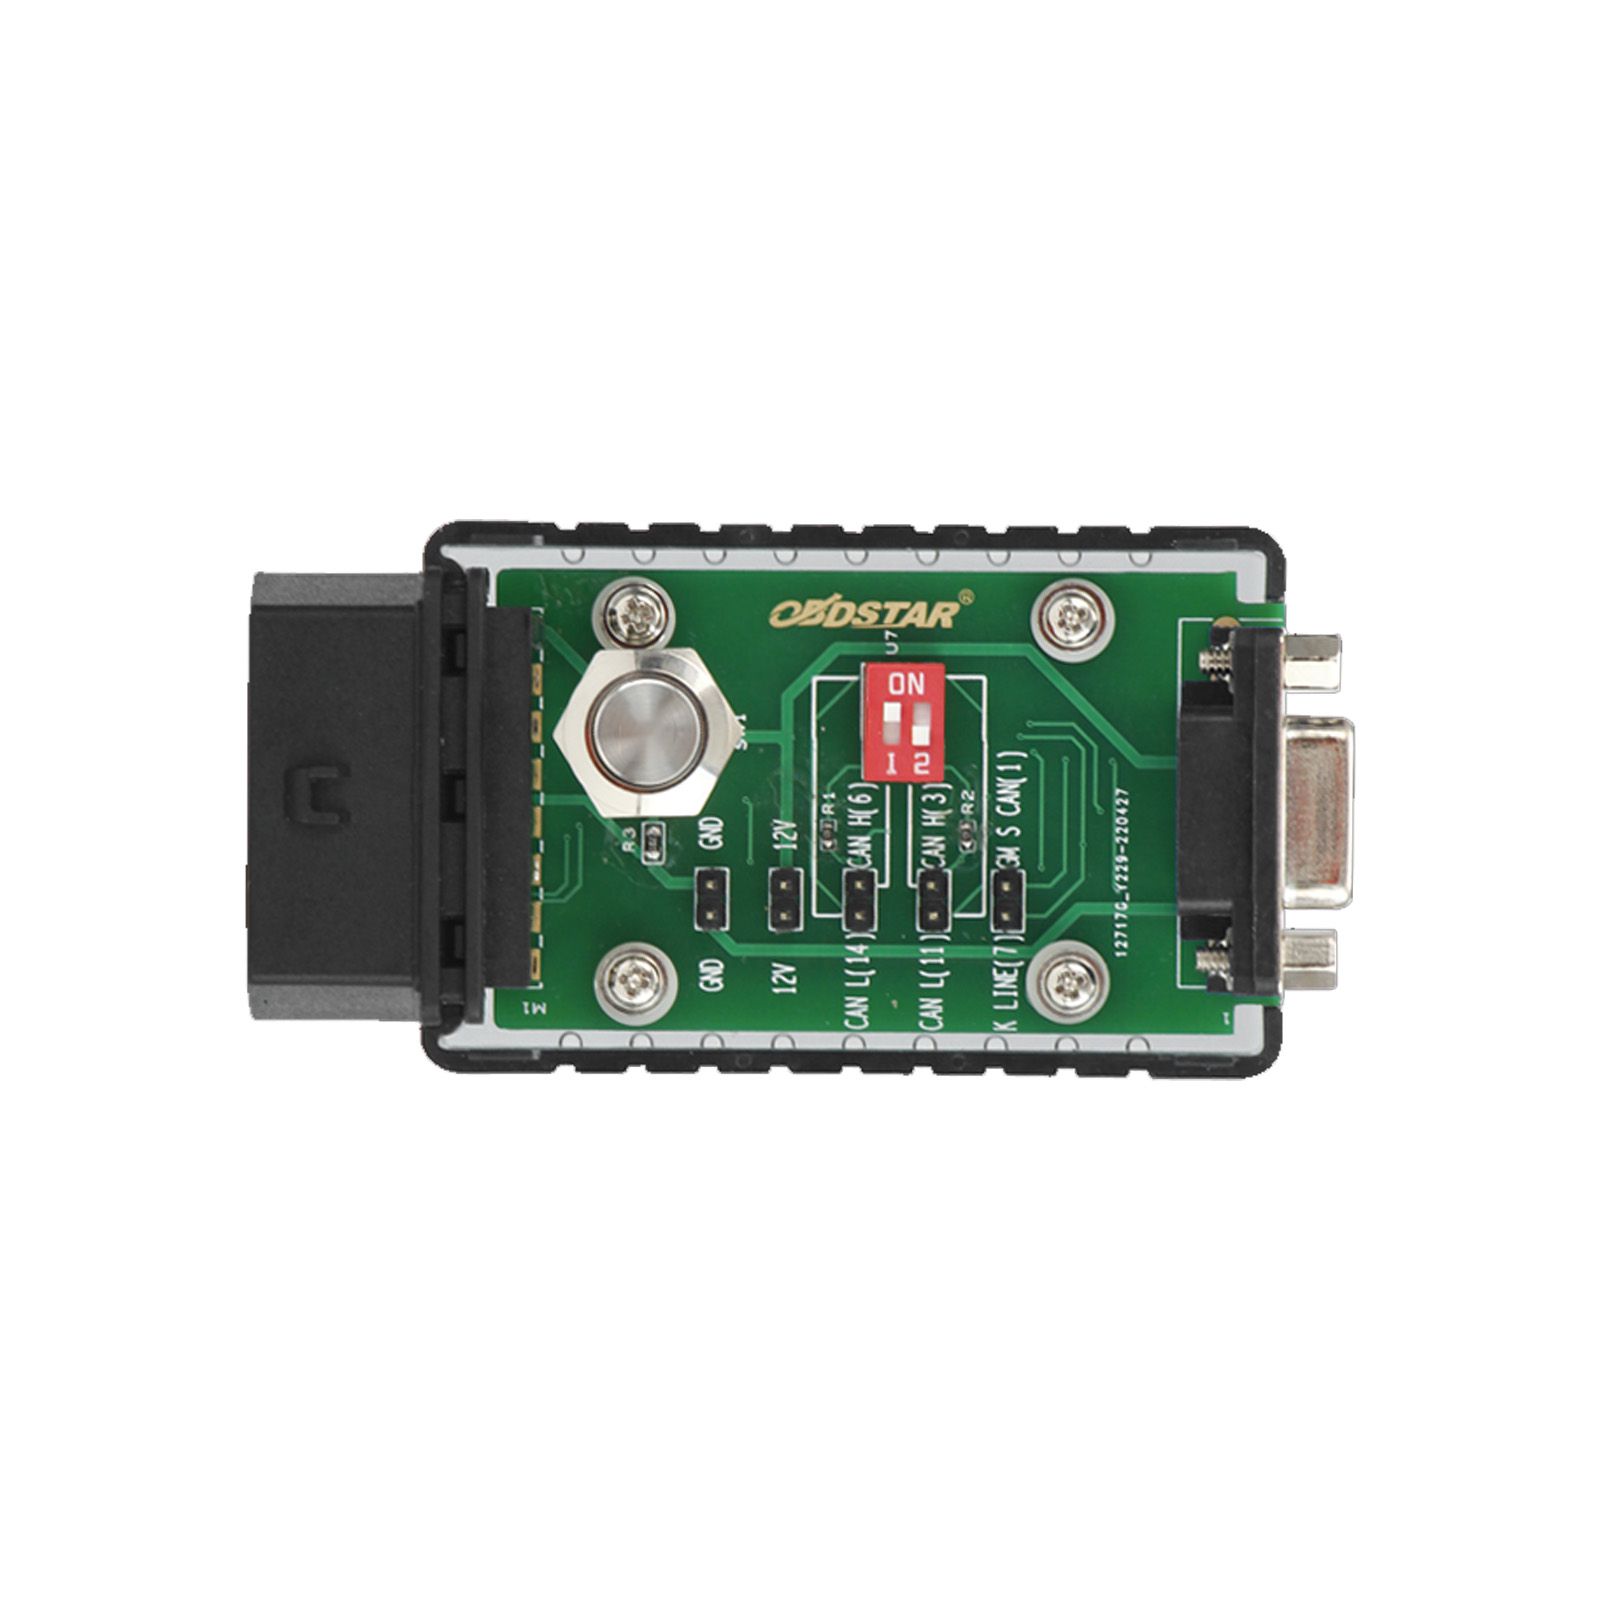 OBDSTAR P004 Adapter for ECU Programming Reading or Writing Data in Bench Mode Used with X300 DP Plus/ OdoMaster/ P50